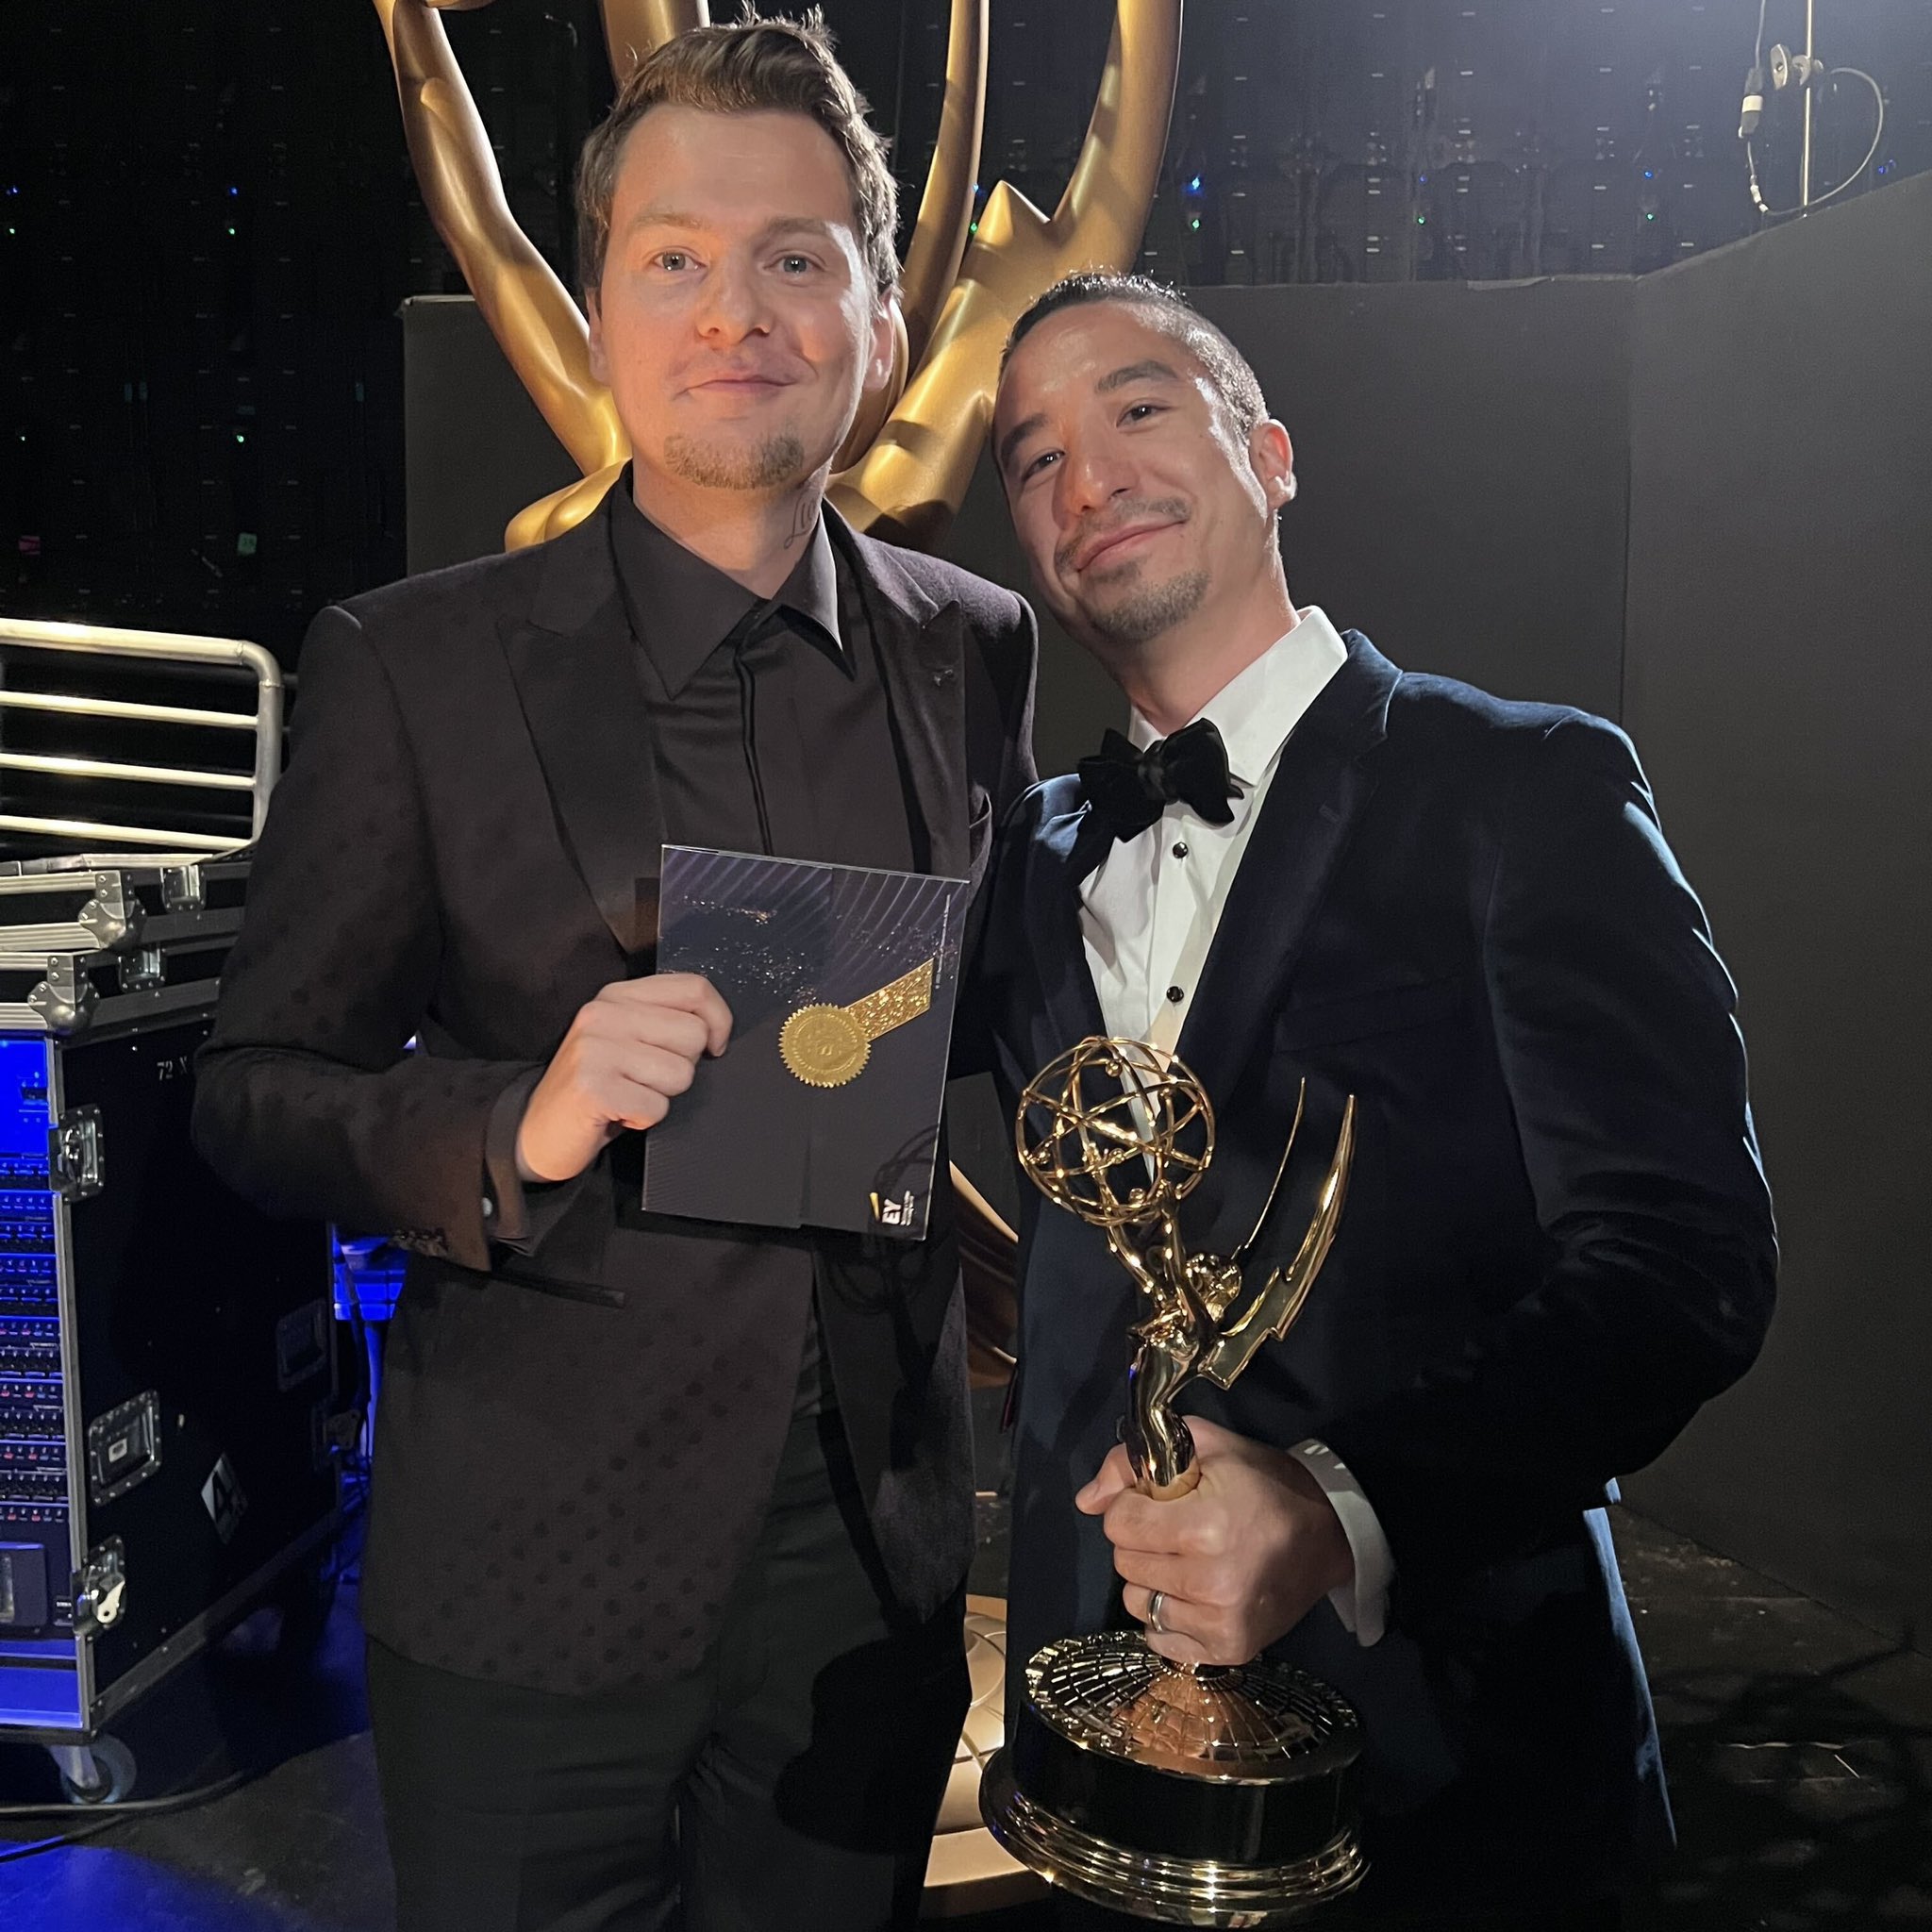 “Honored doesn’t even begin to describe how we feel about winning the #Emmy...